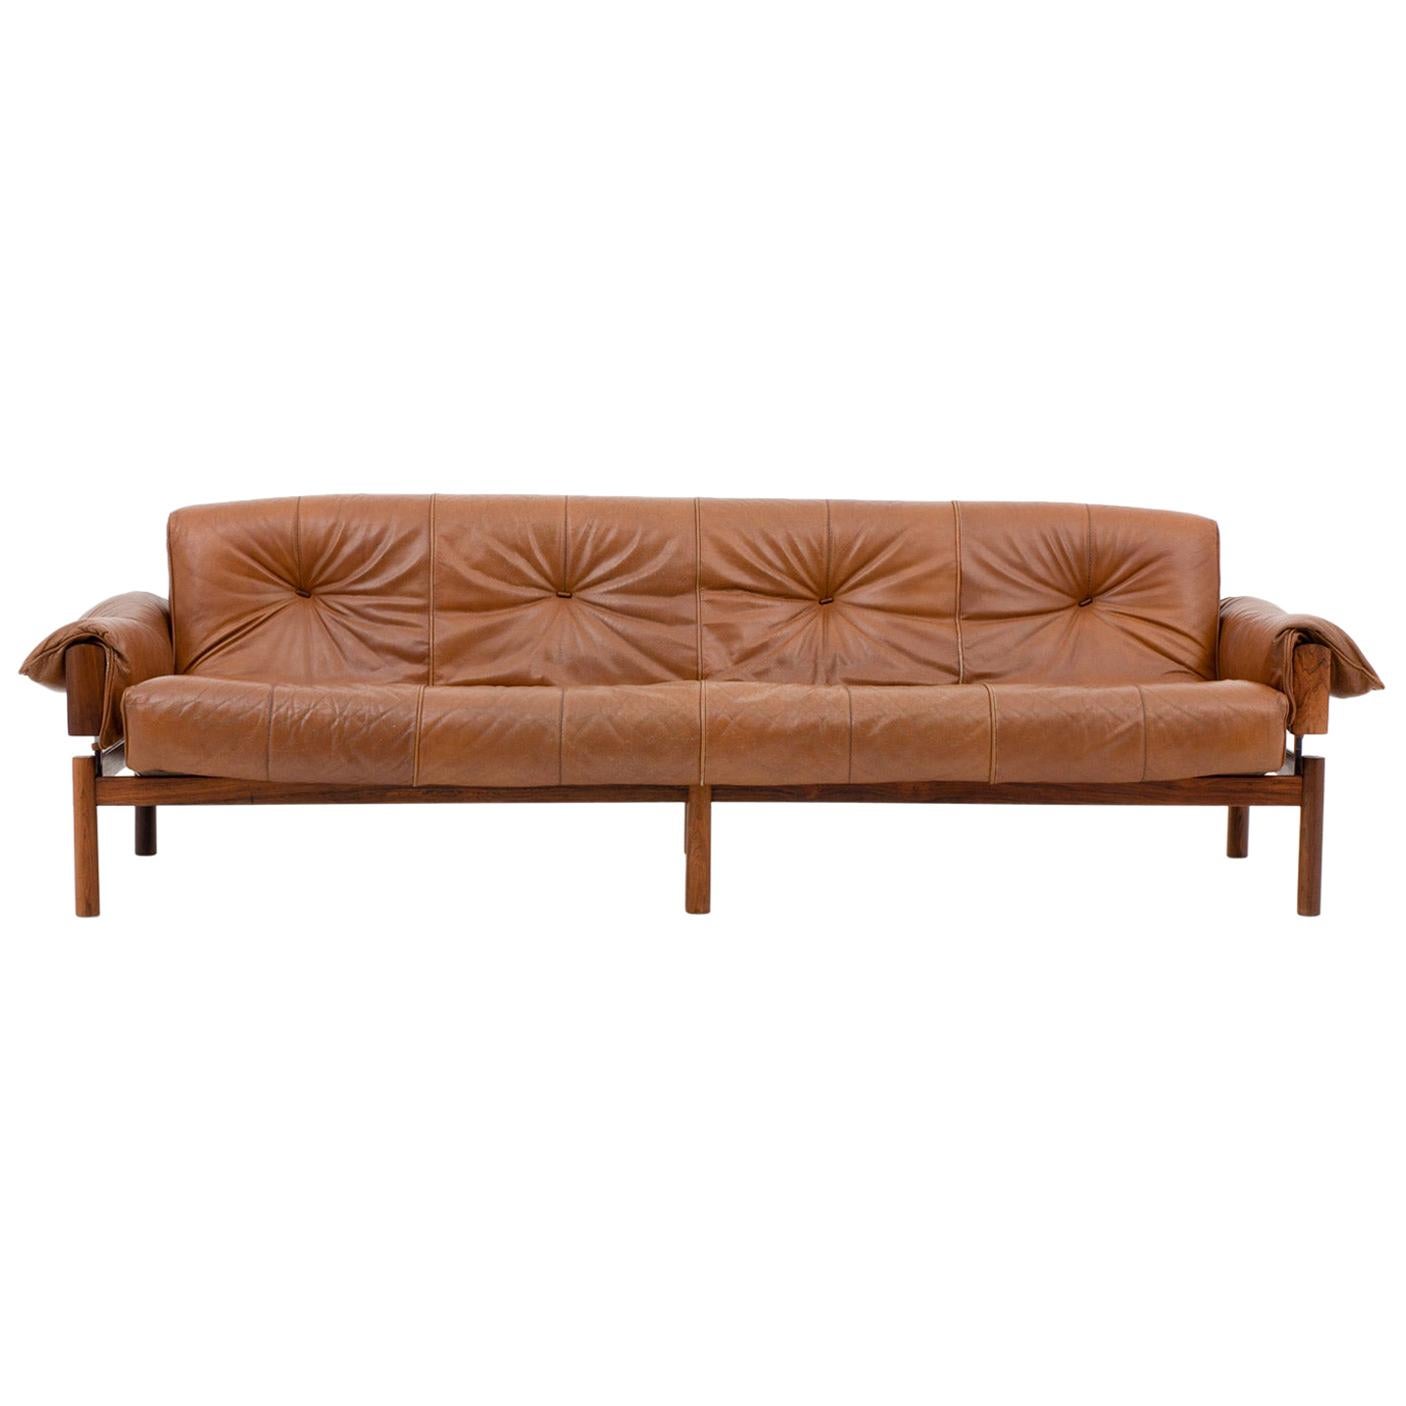 Midcentury Brazilian Sofa in Brown Leather and Rosewood by Percival Lafer